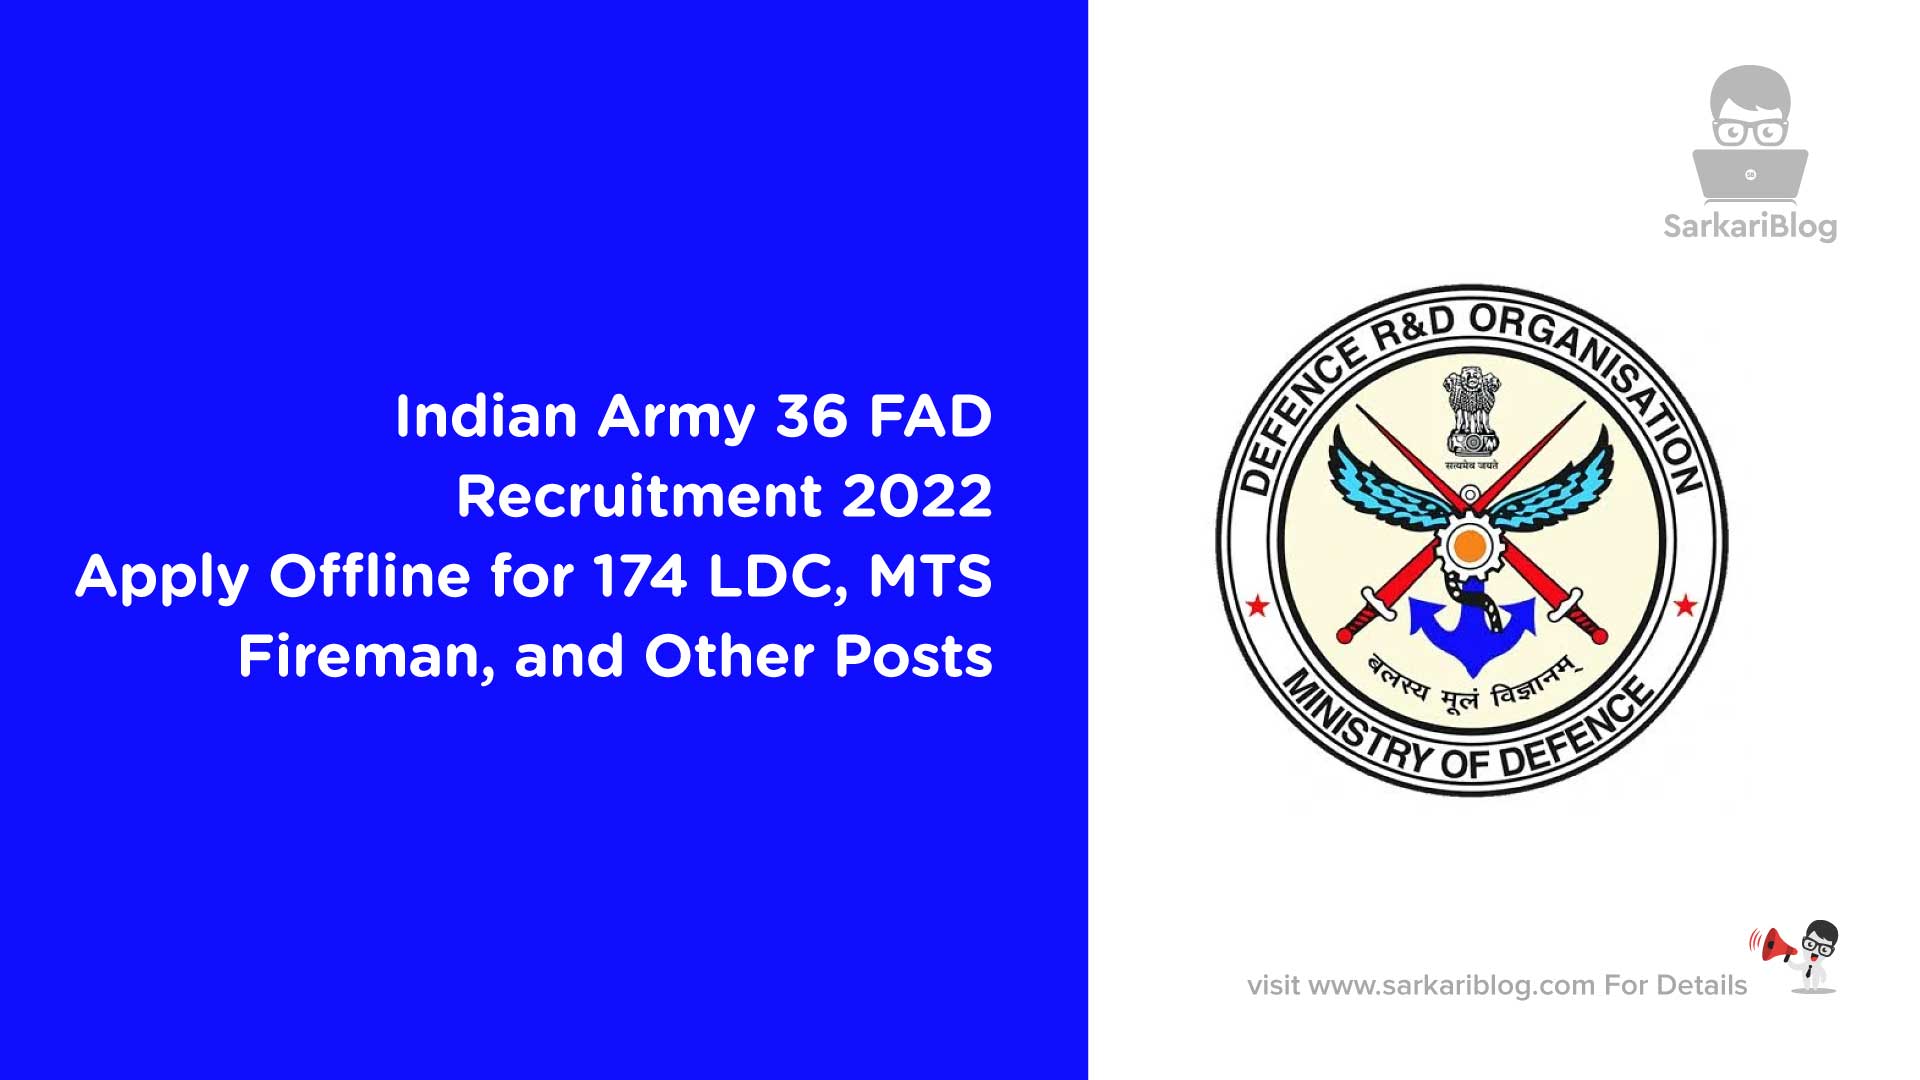 Indian Army 36 FAD Recruitment 2022